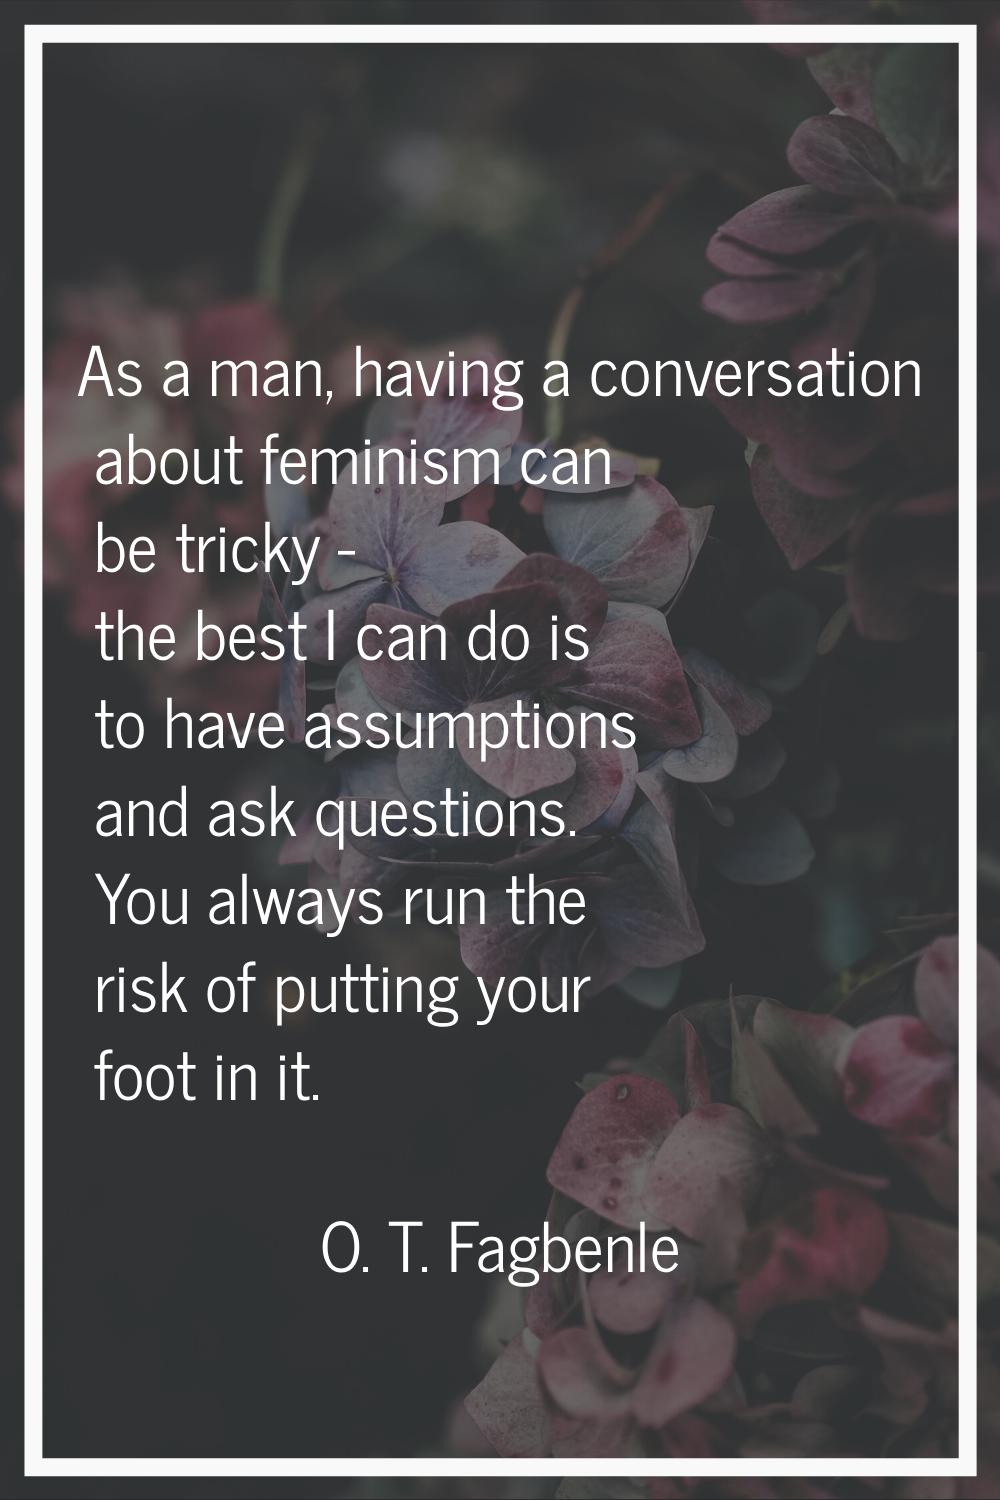 As a man, having a conversation about feminism can be tricky - the best I can do is to have assumpt